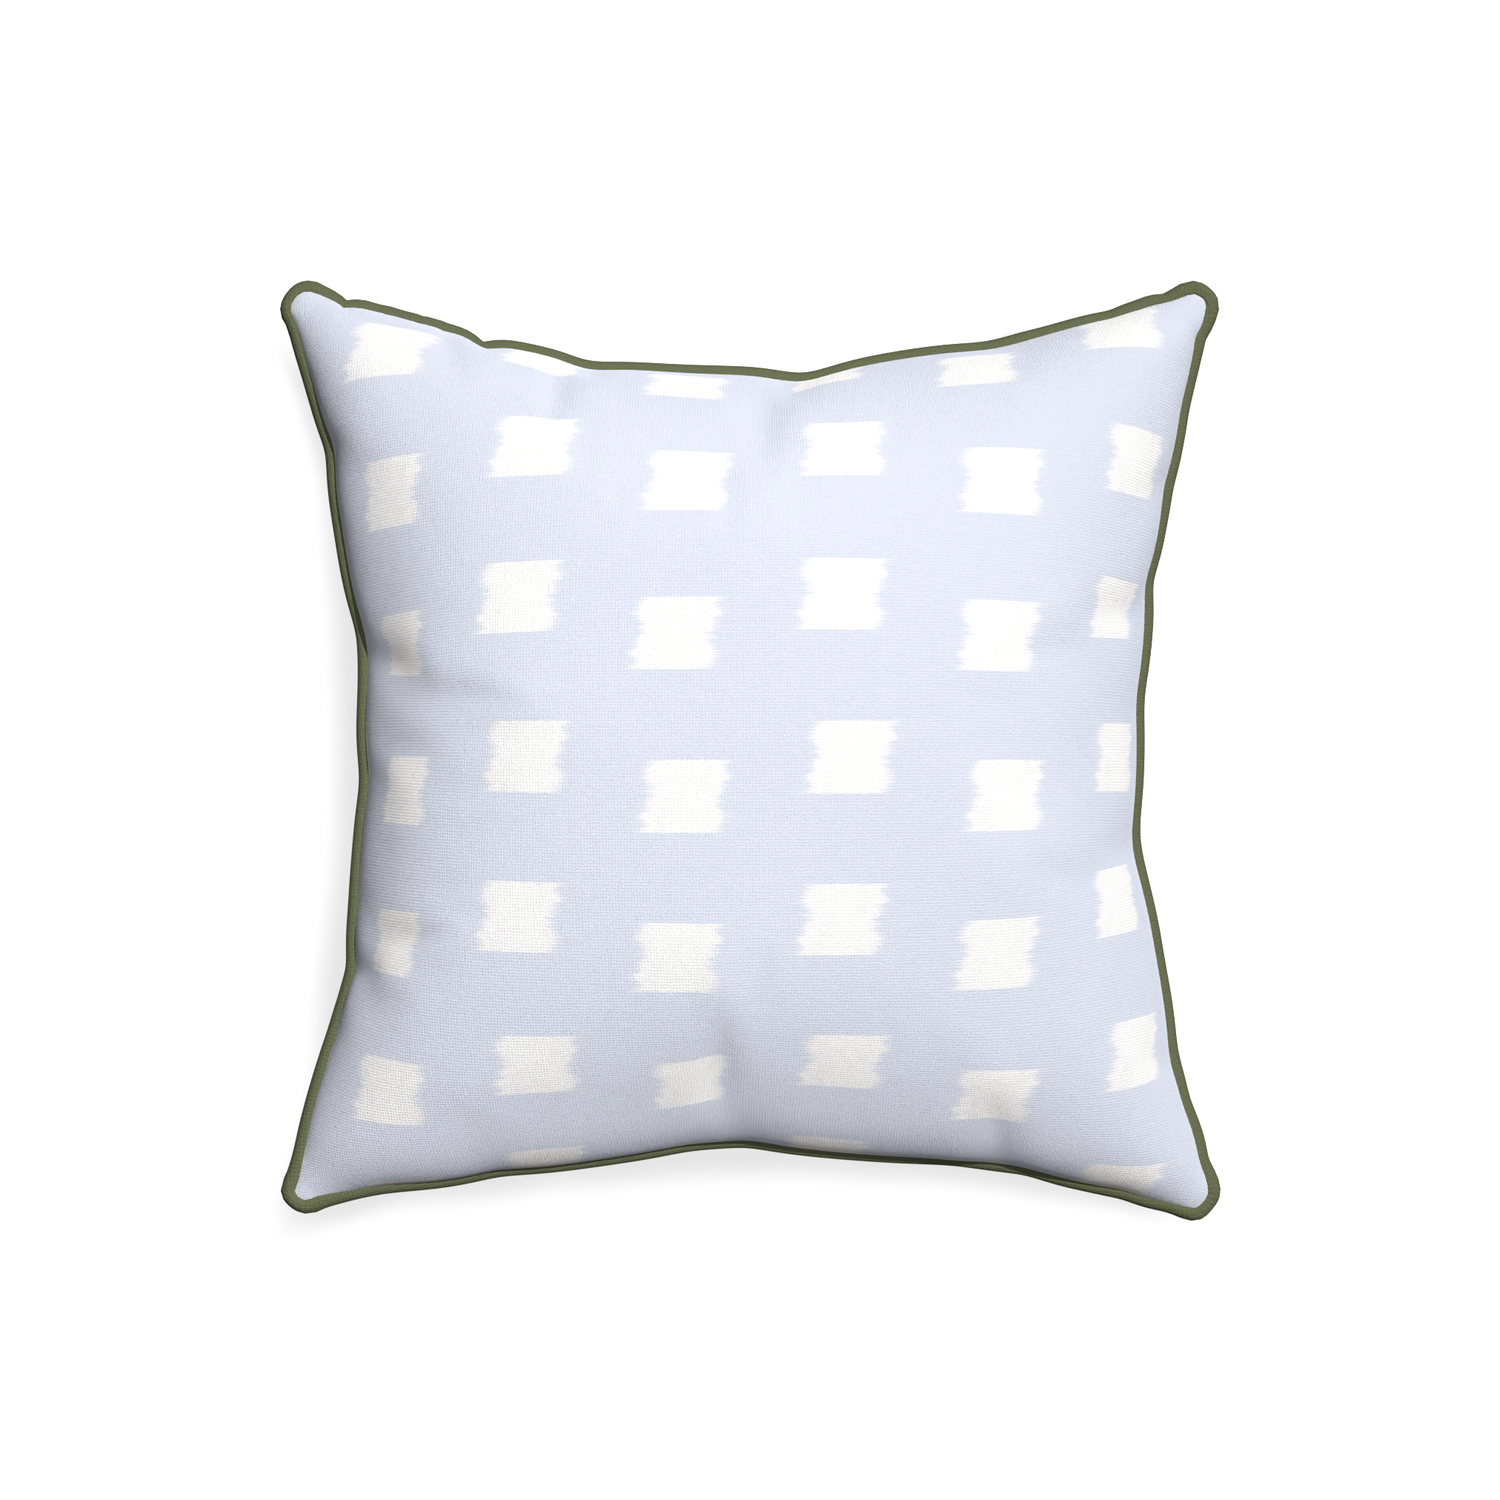 20-square denton custom pillow with f piping on white background